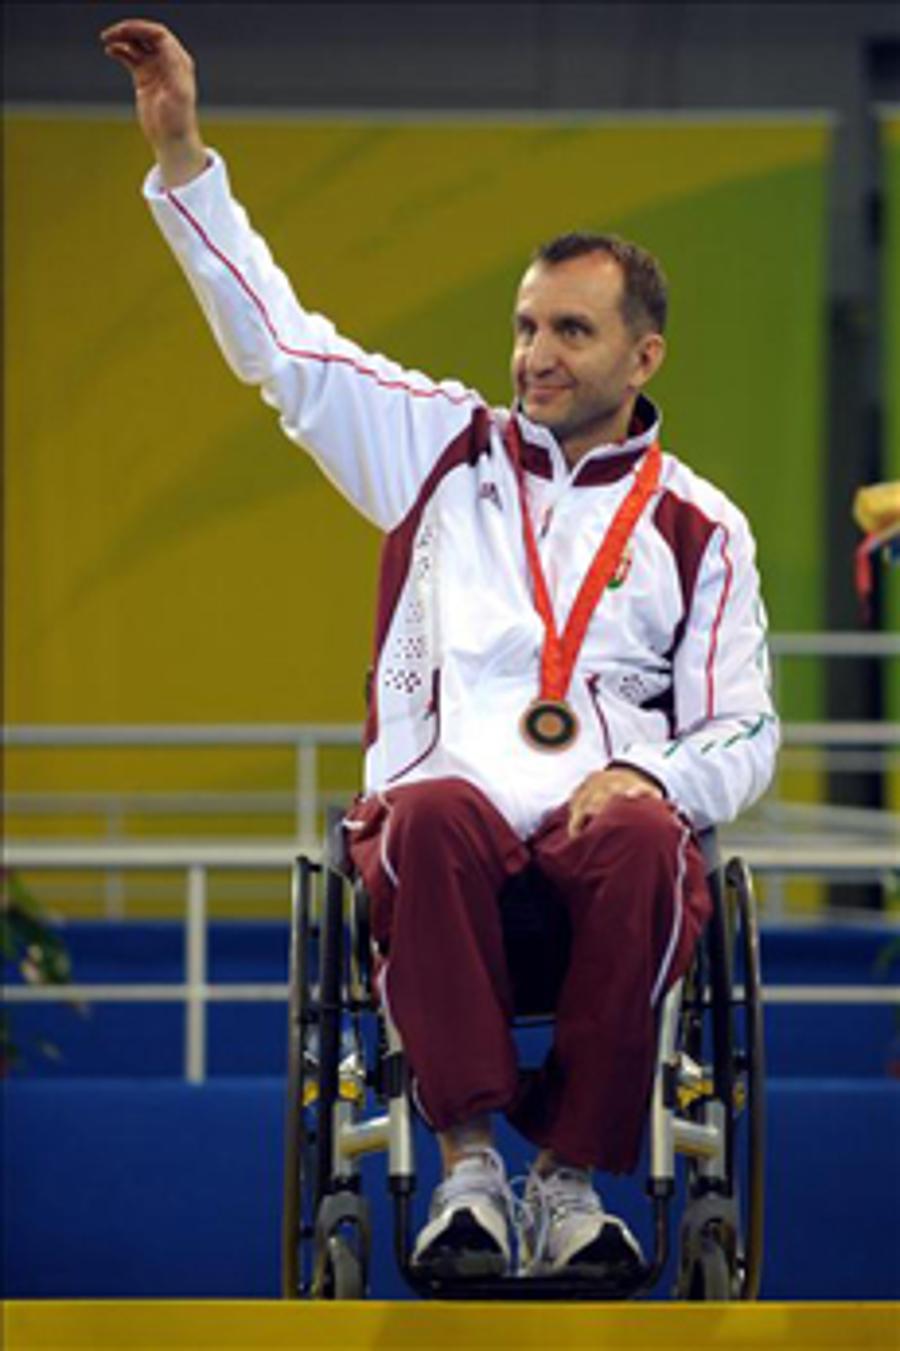 Hungary's Minister Of Human Resources To Attend The Paralympic Games In London